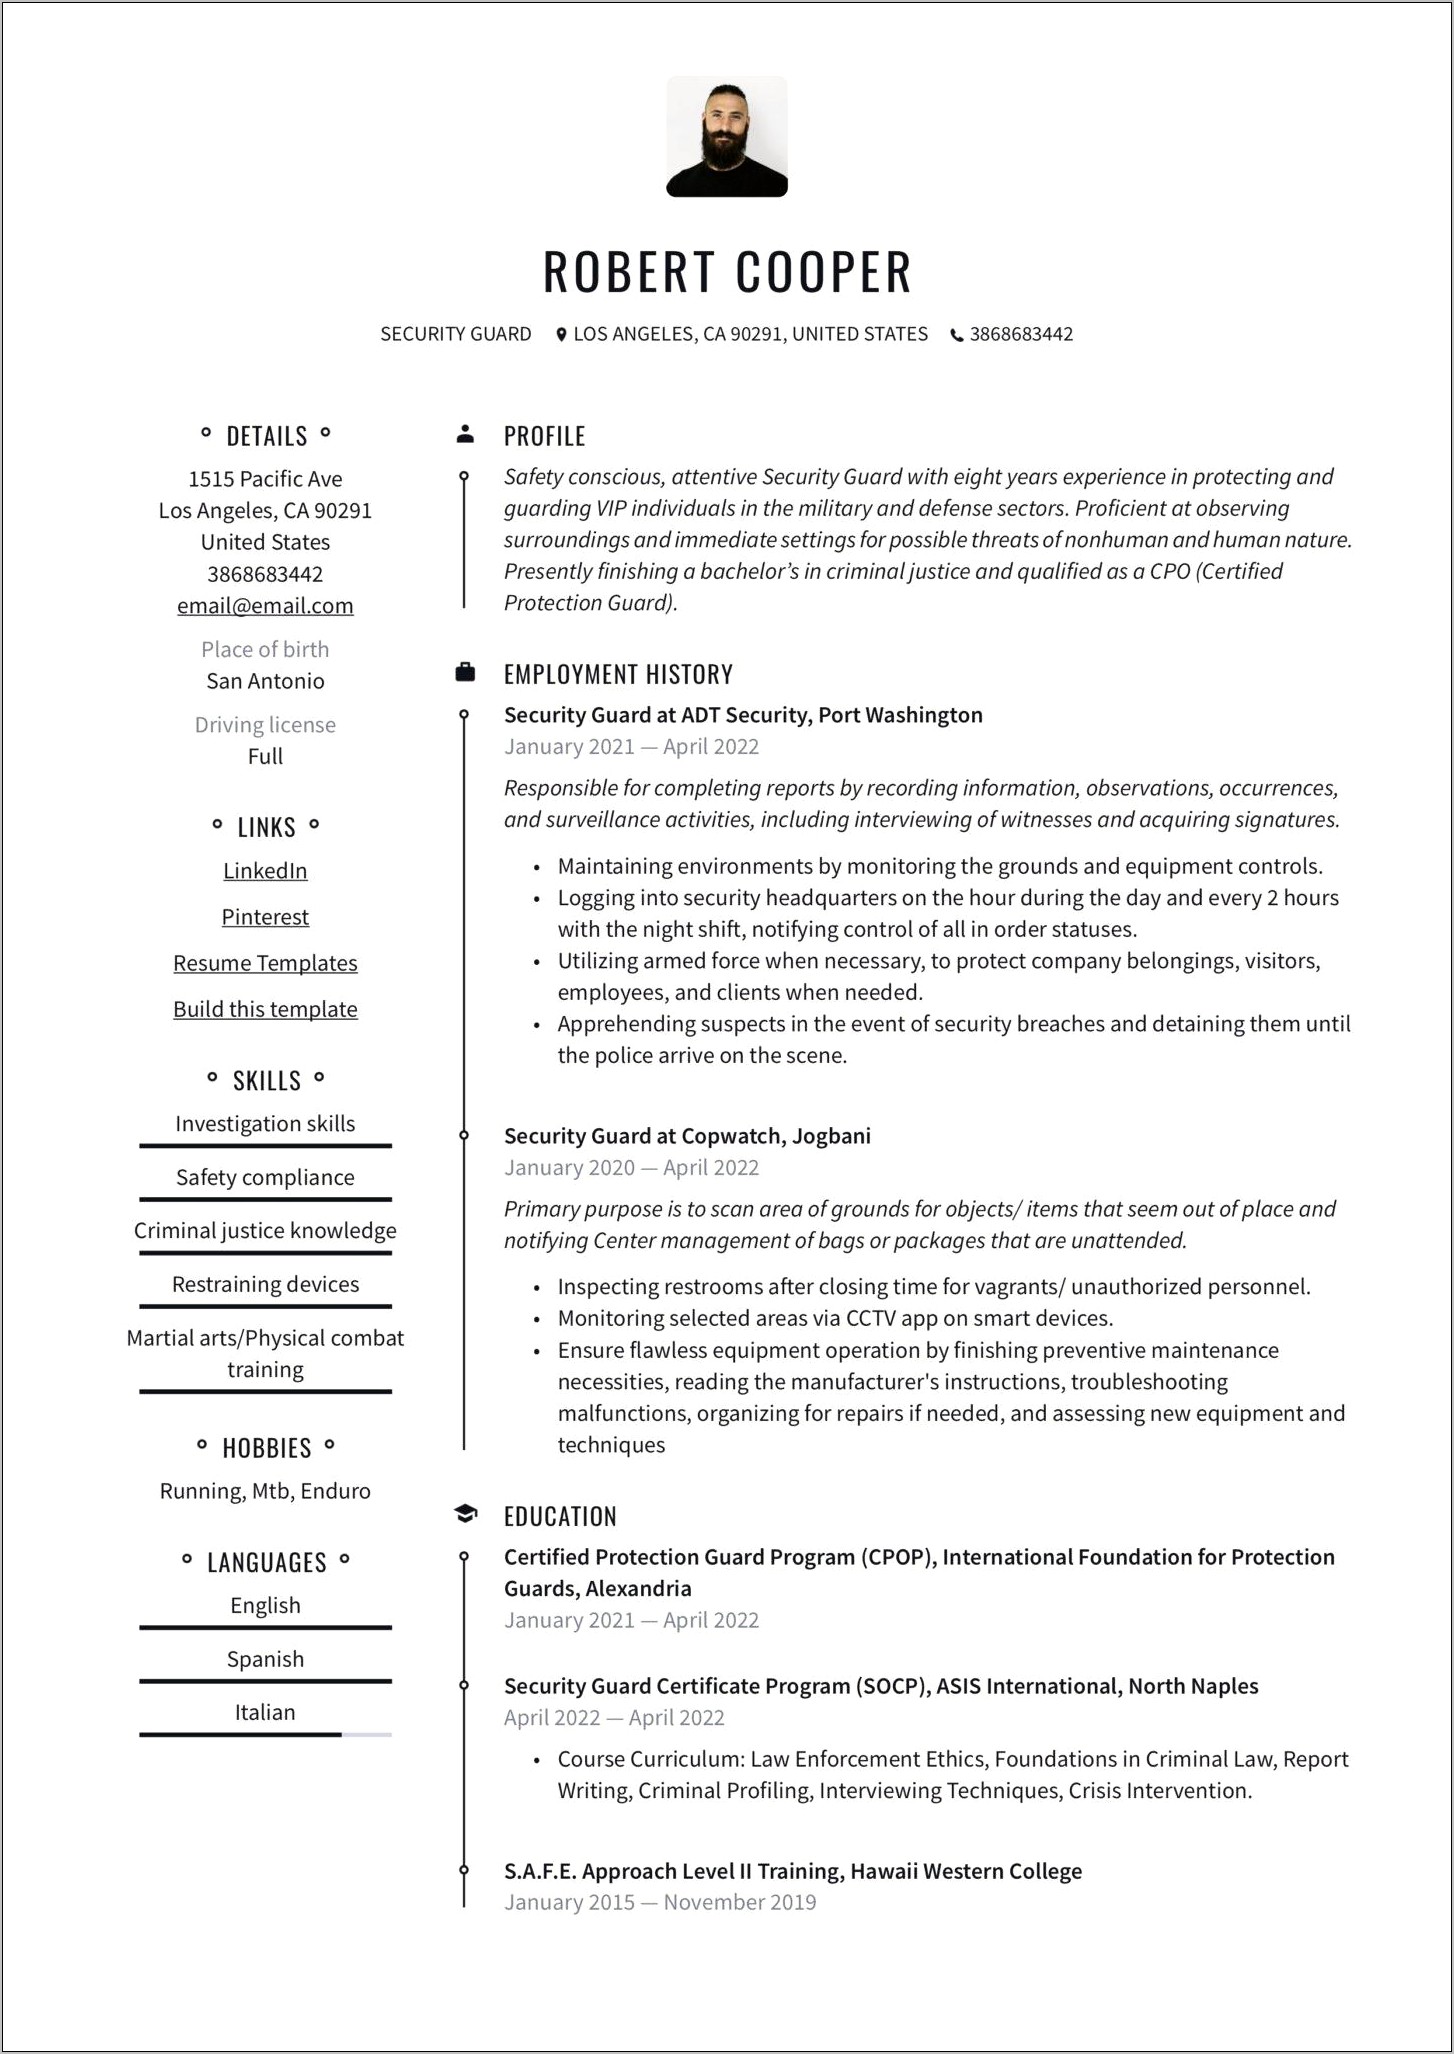 Resume Application Form Free Download